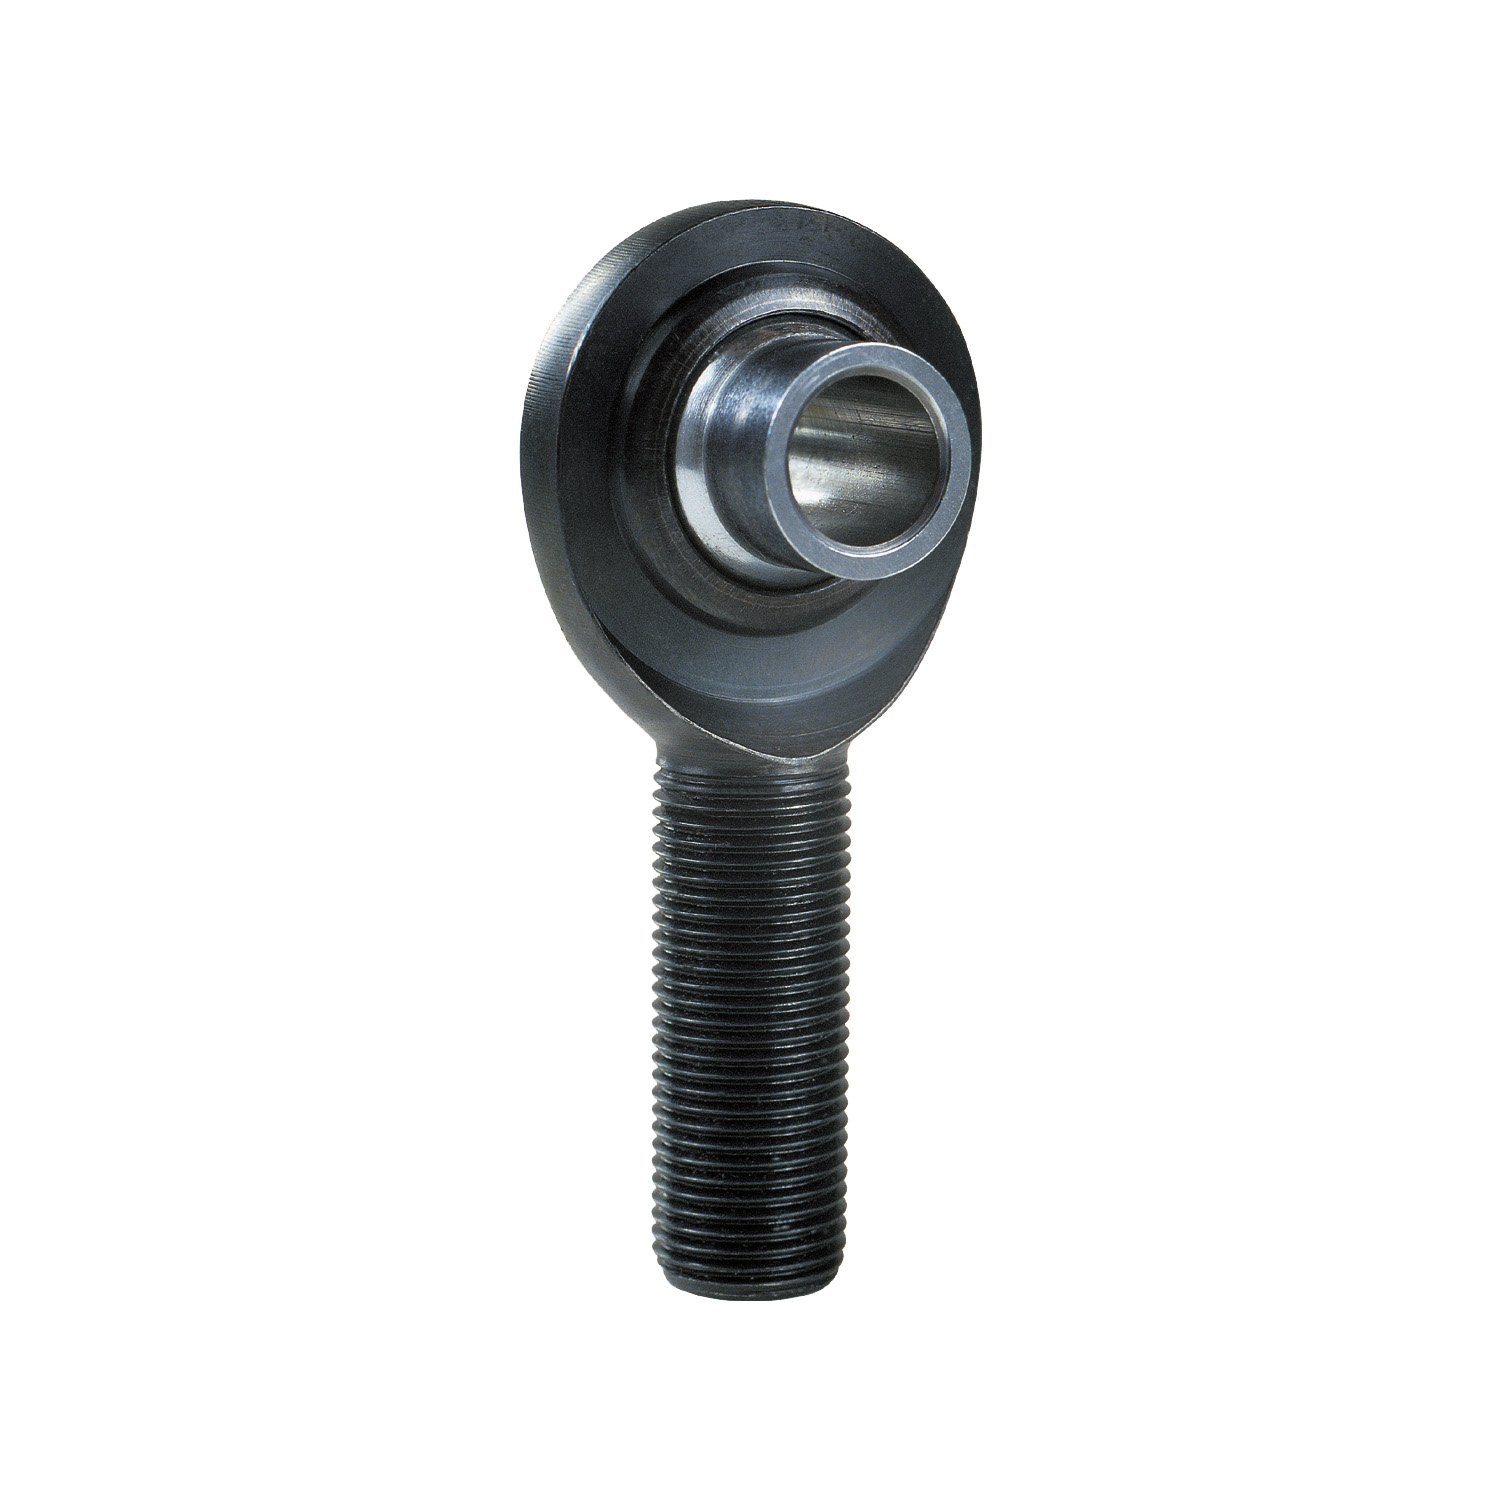 PCYM-T Series Rod End Hole I.D.: .500 in.